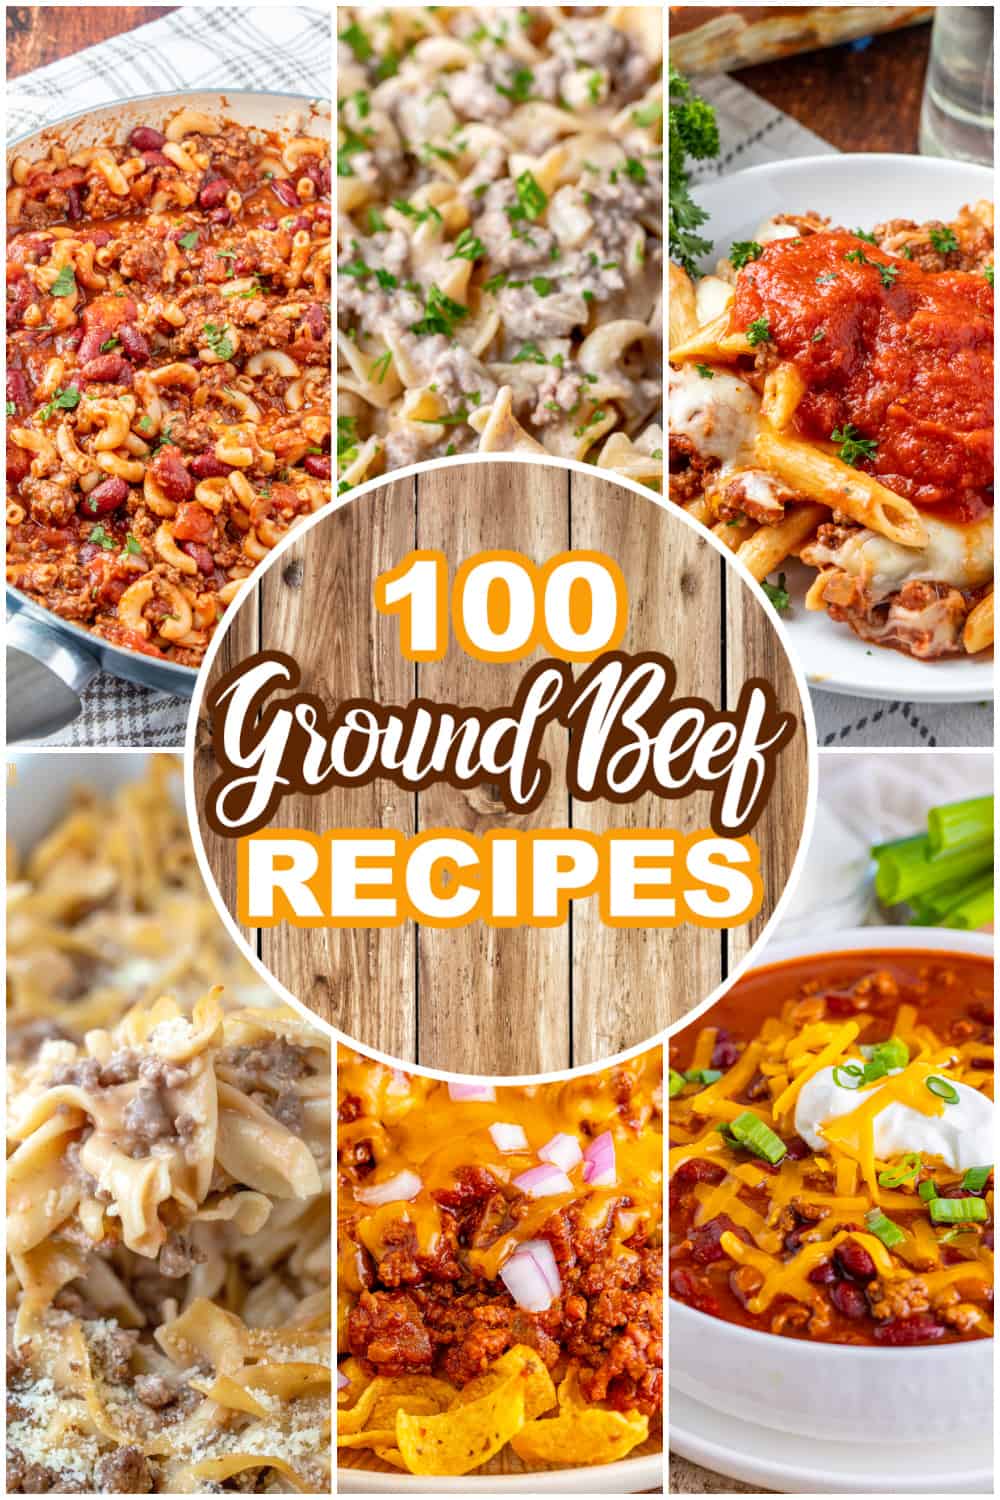 a collage of 6 photos with text on the collage reads "100 Ground Beef Recipes". 